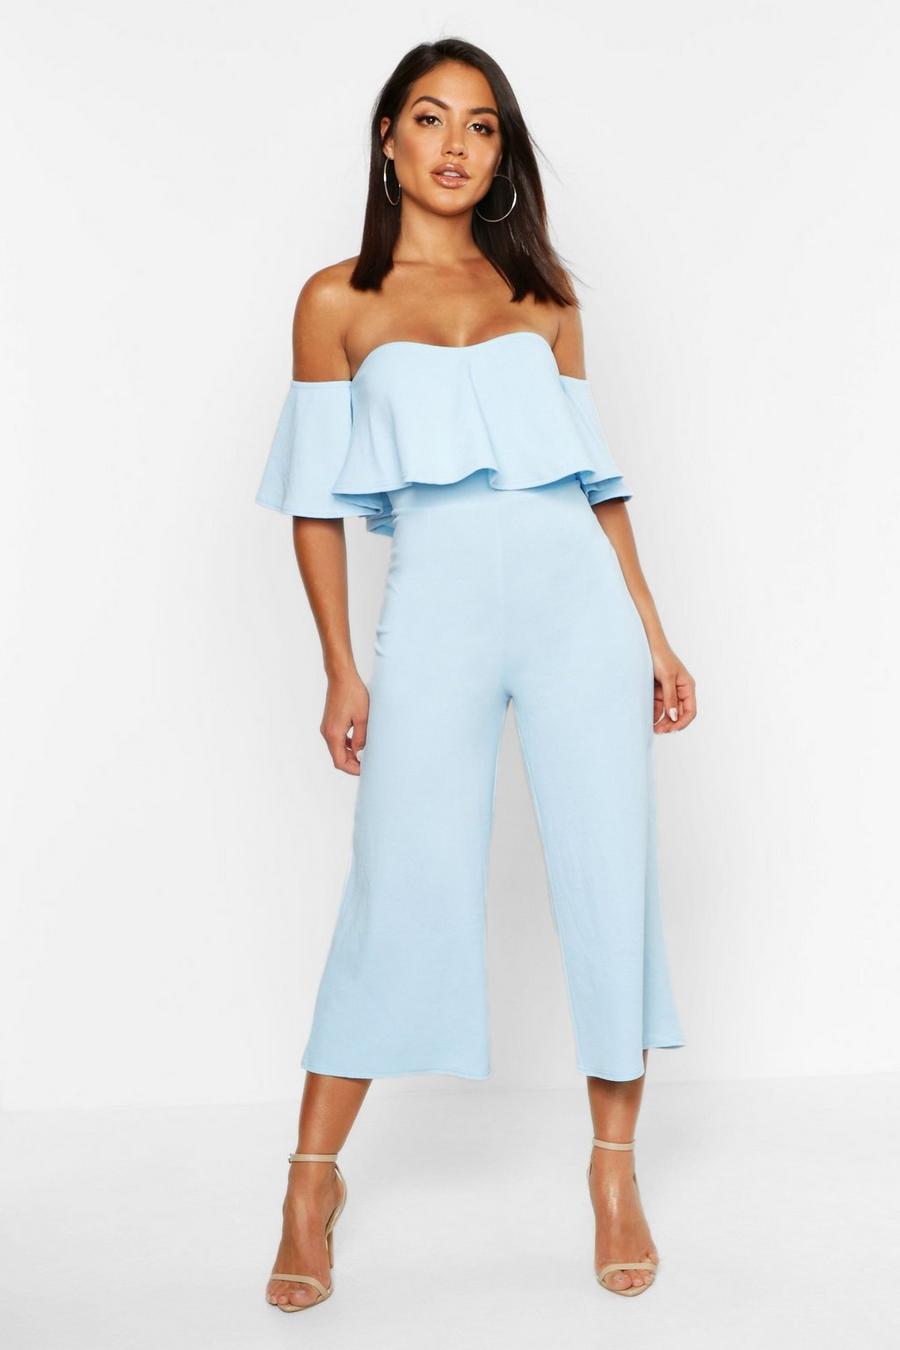 Shop Popilush Women's Jumpsuits & Rompers up to 15% Off